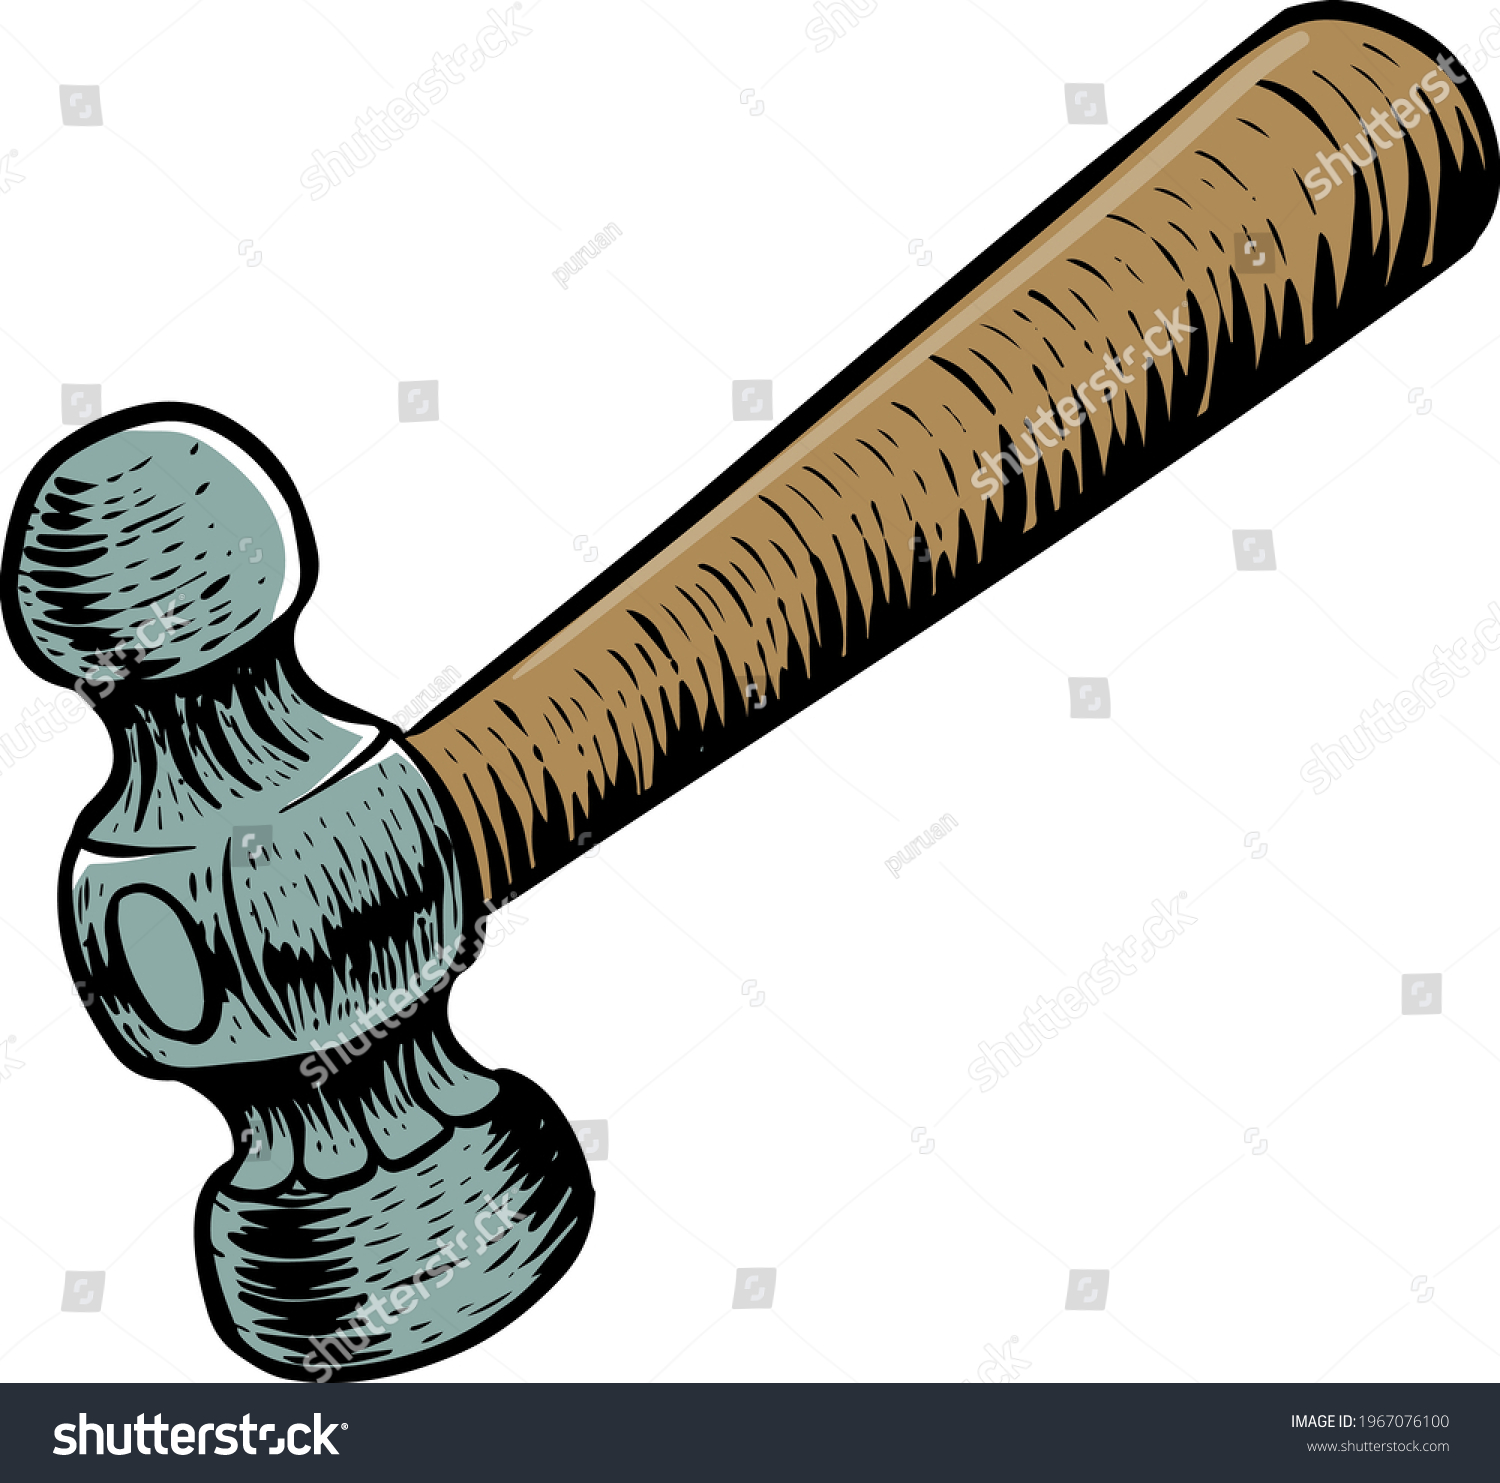 SVG of Color ball-peen hammer in woodcut drawing woodworking tool svg